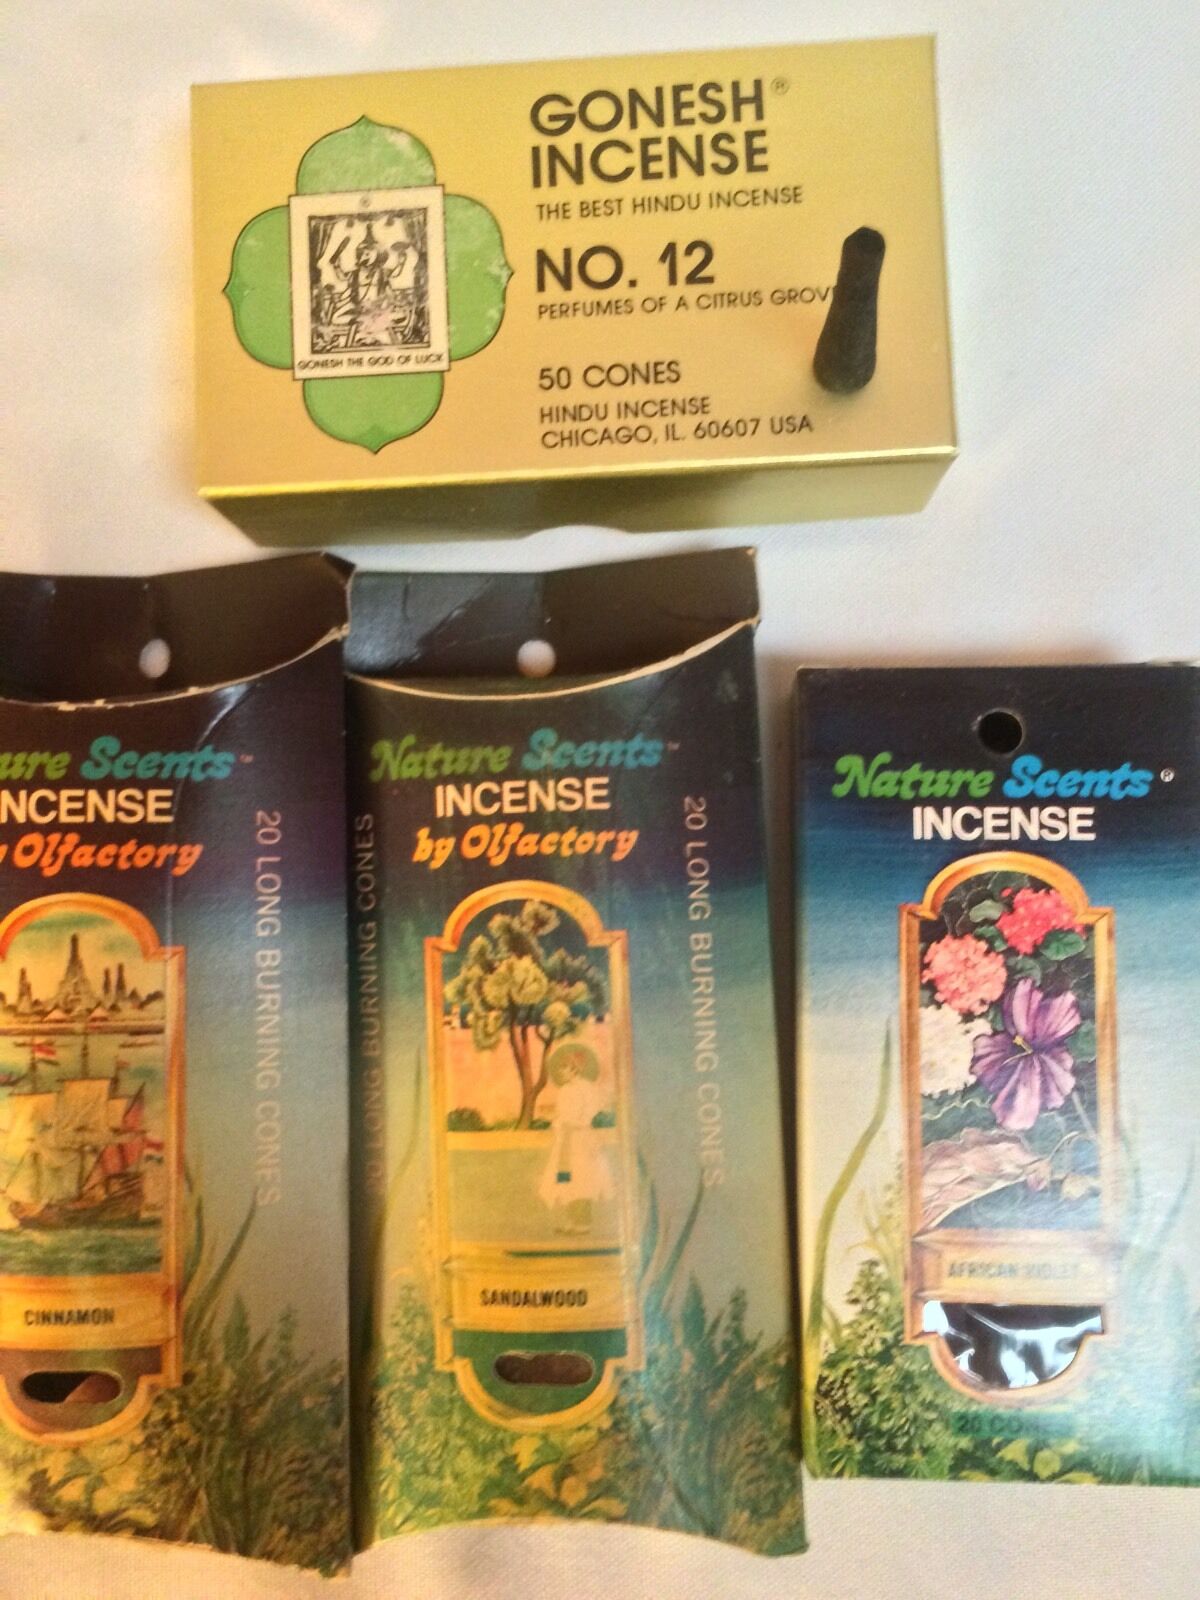 Lot of 4 Incense Vintage never used 1970's Gonesh no. 12 & olfactory 110 cones